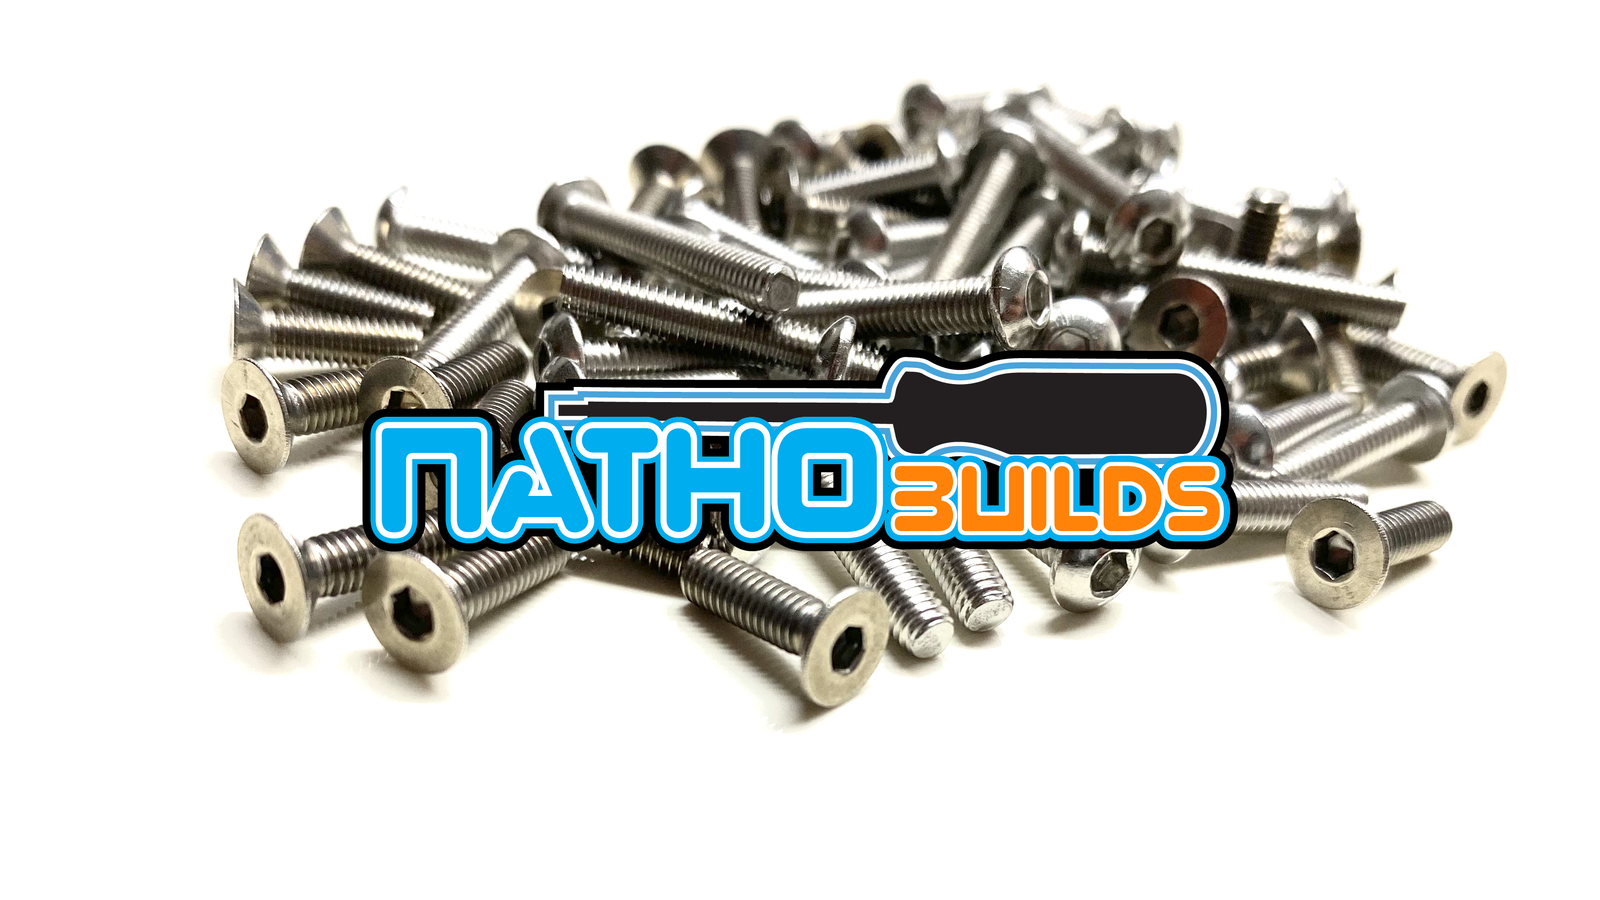 NathoBuilds: Stainless Steel Screw Kits - 2WD - TLR 22T 4.0